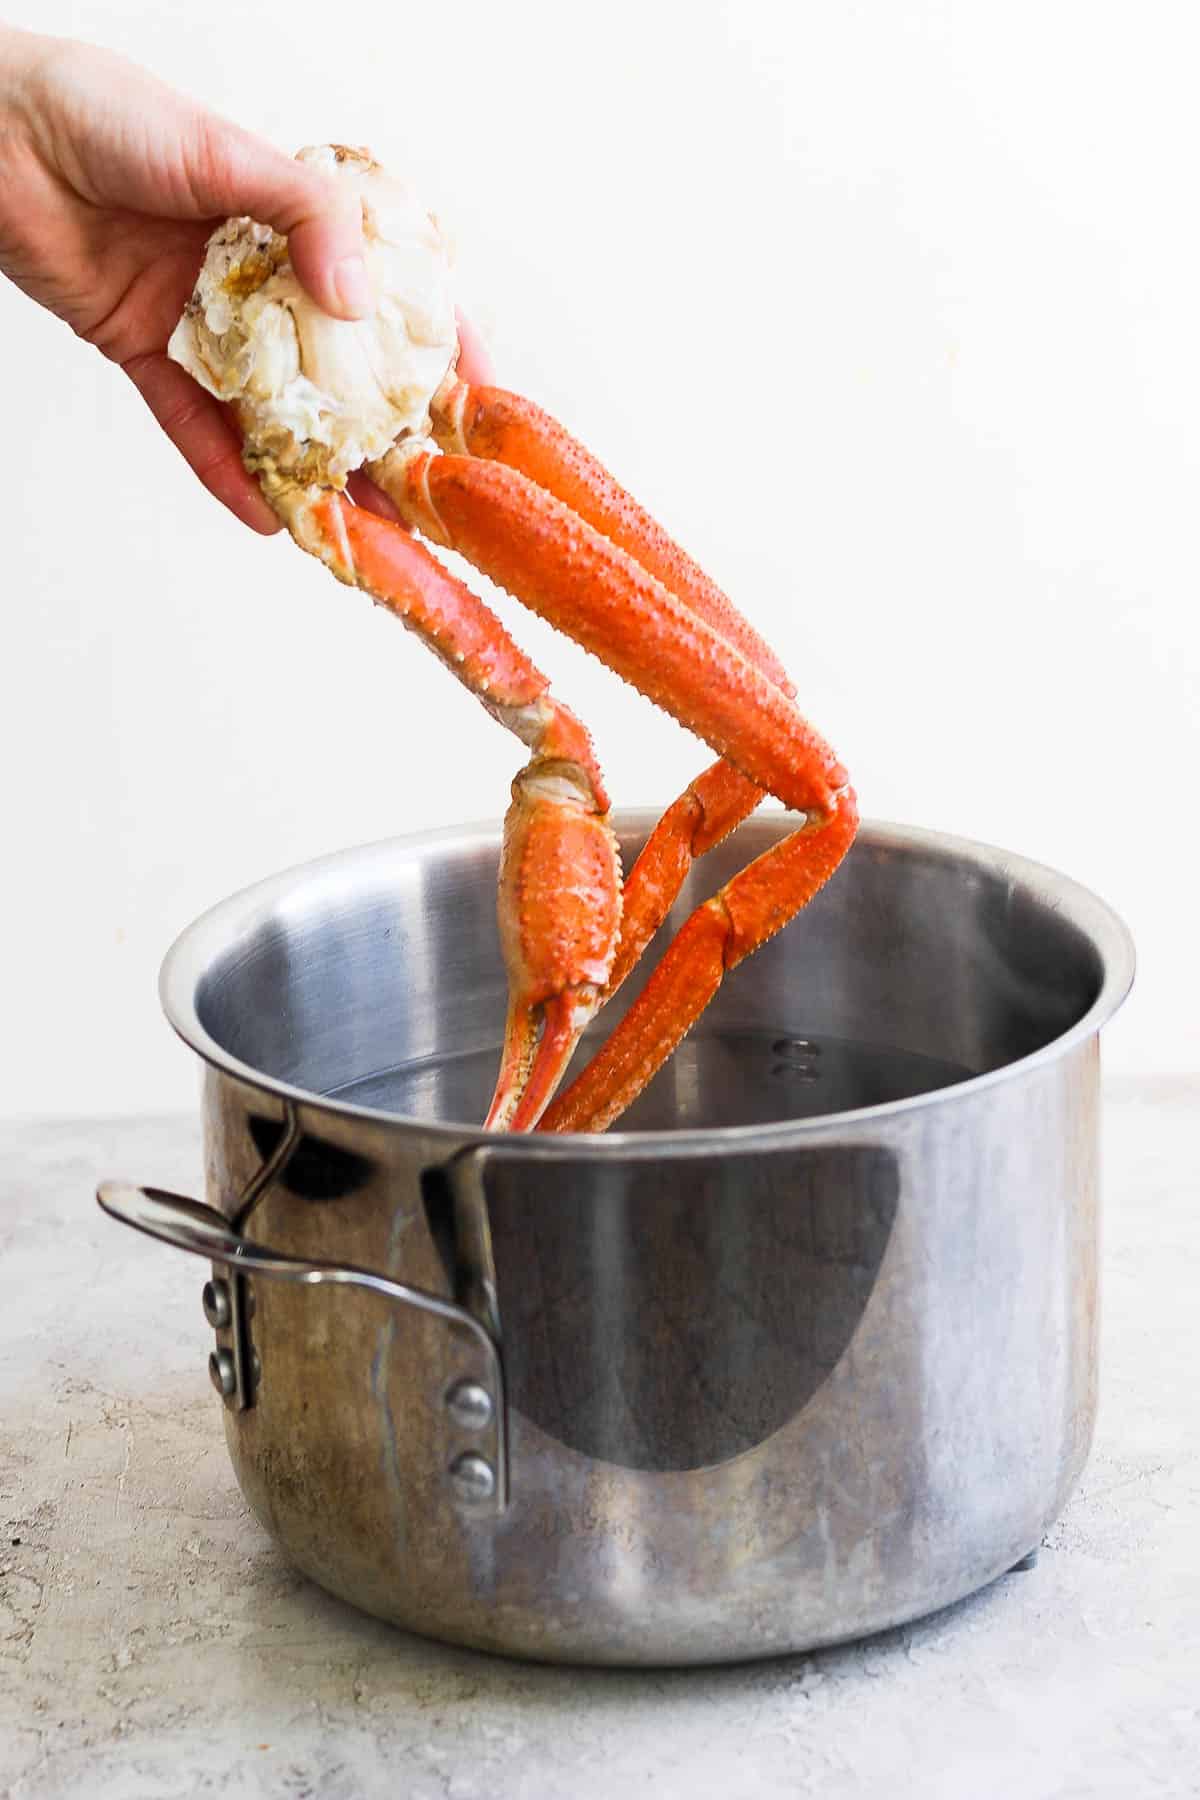 A hand placing a crab cluster in a pot of boiling water.